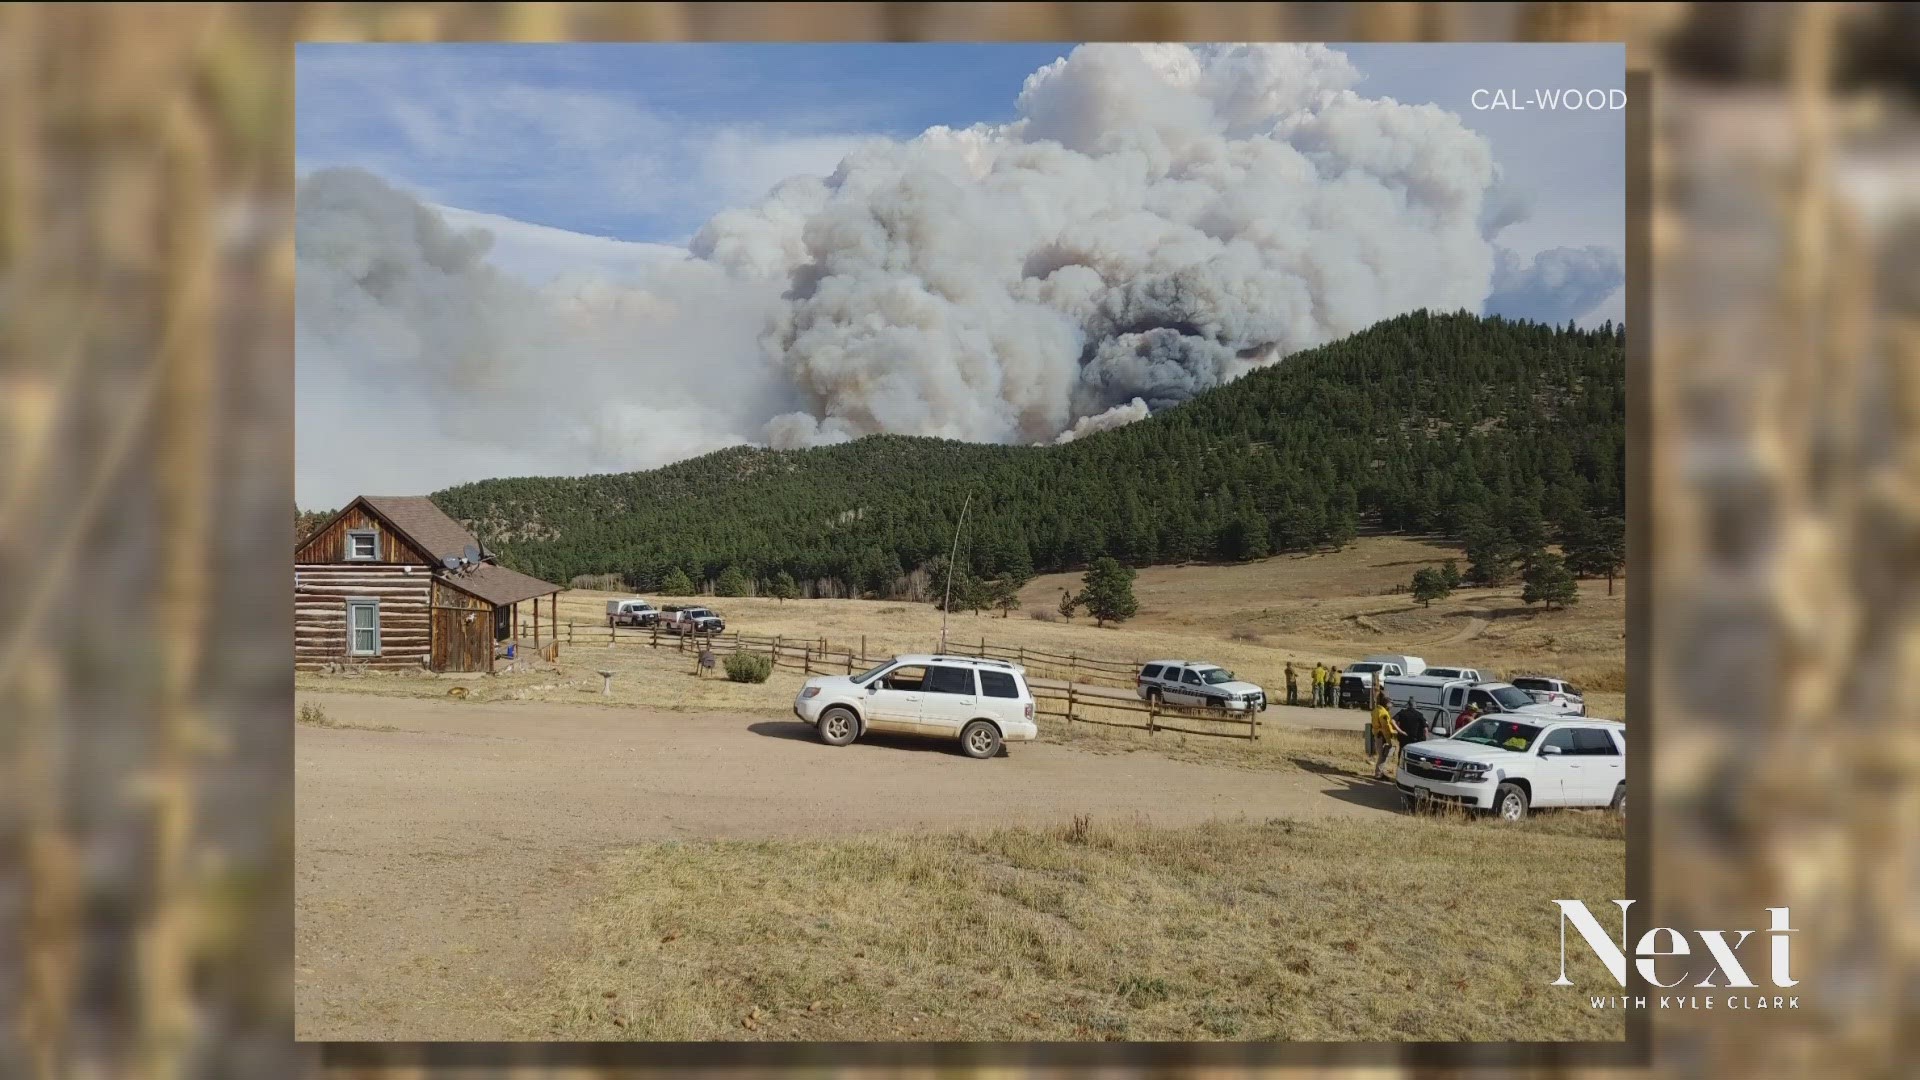 The Cal-Wood Education Center is teaching students about the Calwood Fire that burned 600 acres of the nonprofit's land in Boulder County in 2020.